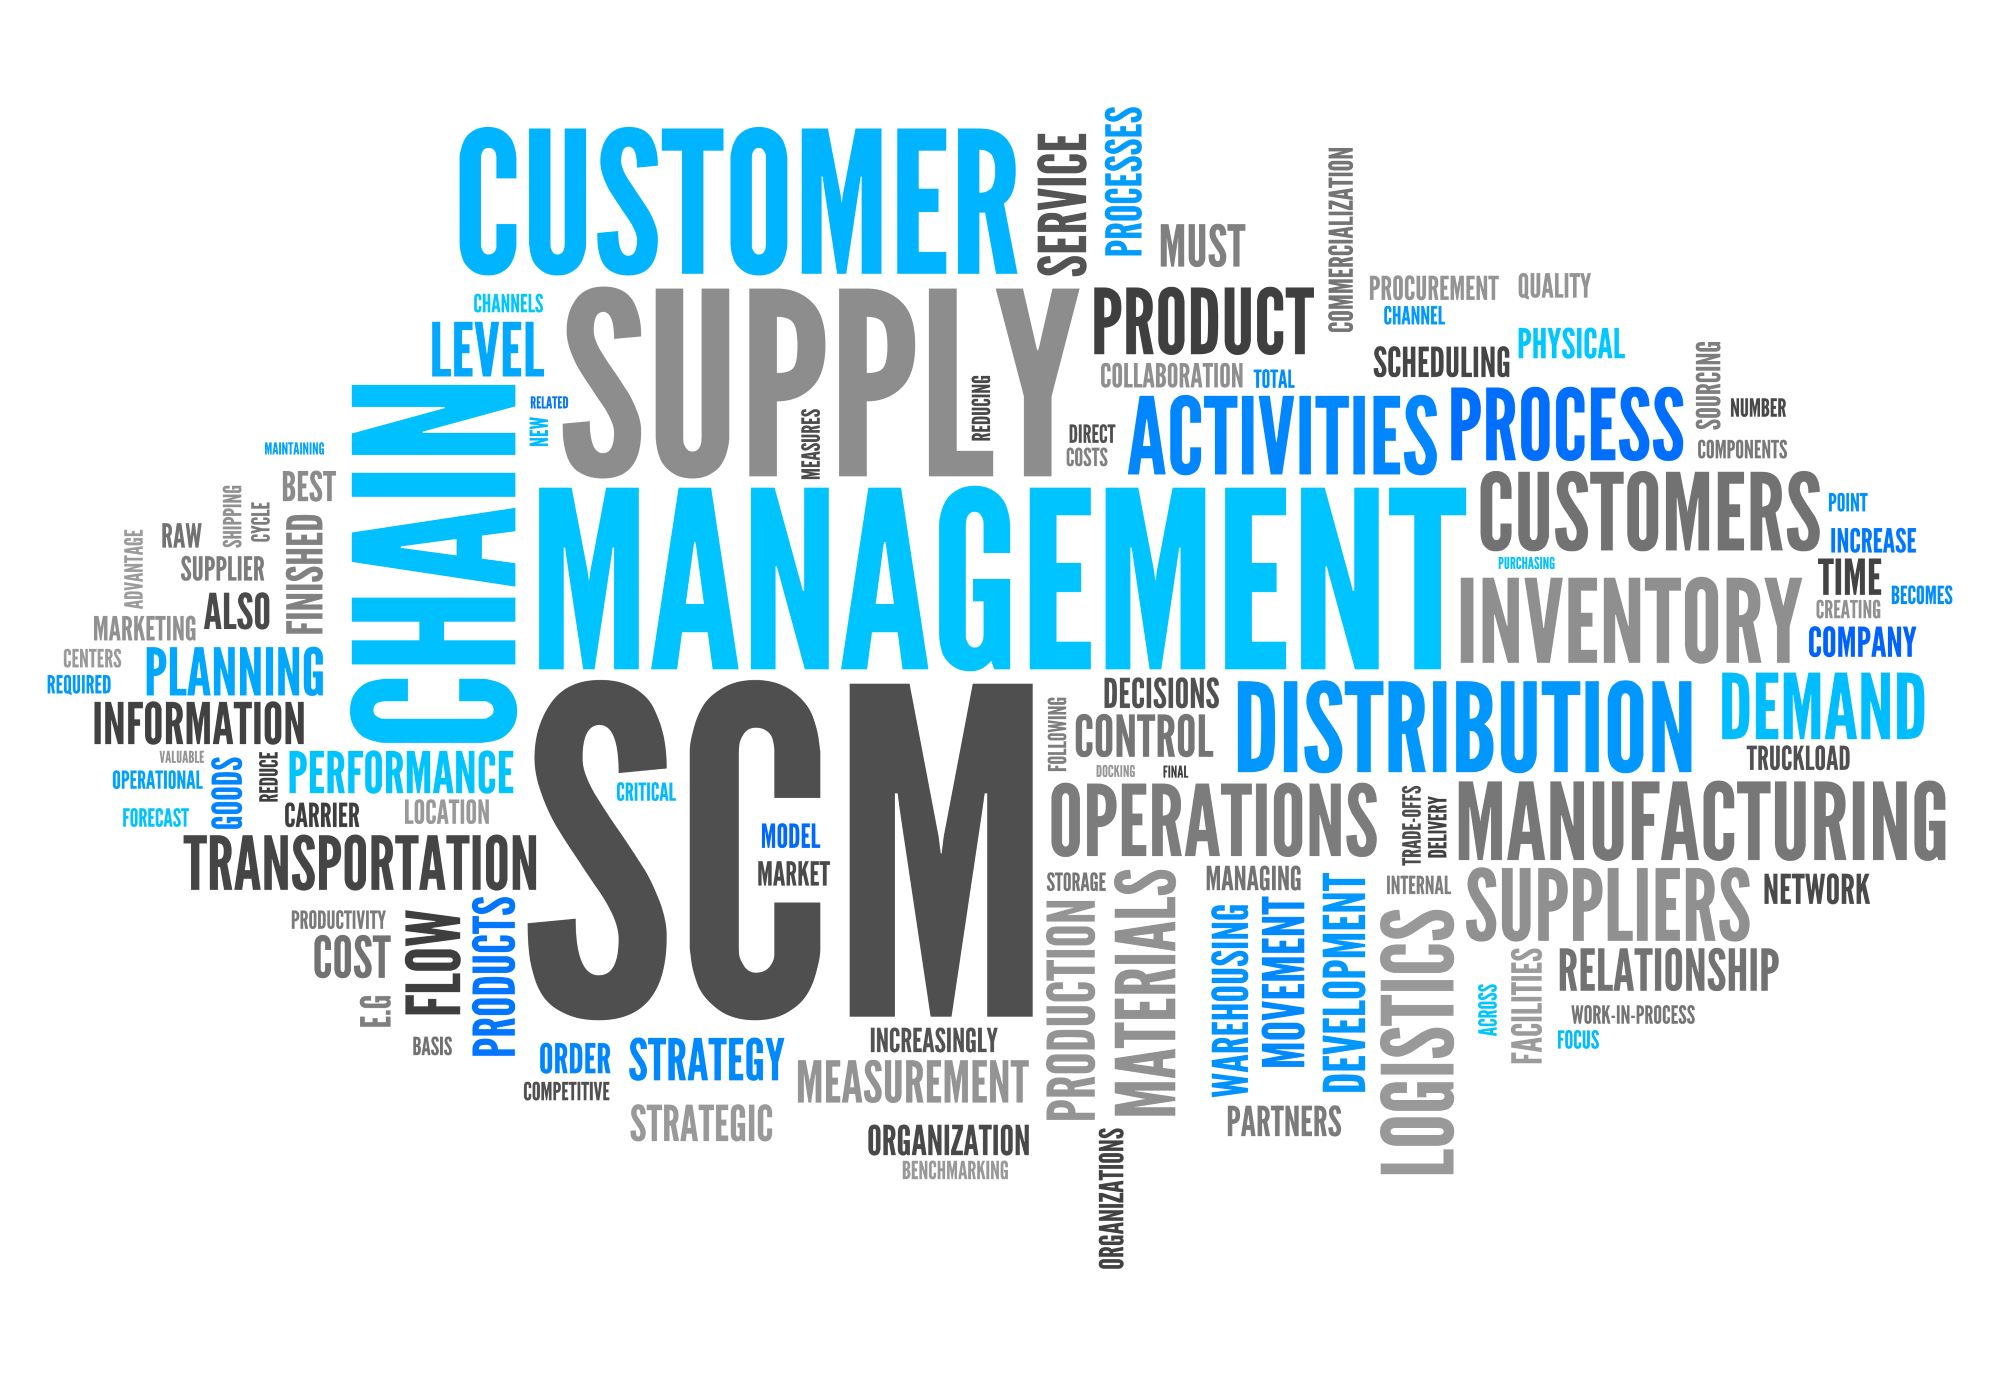 Strategic Tools for Businesses in Competitive Supply Chains